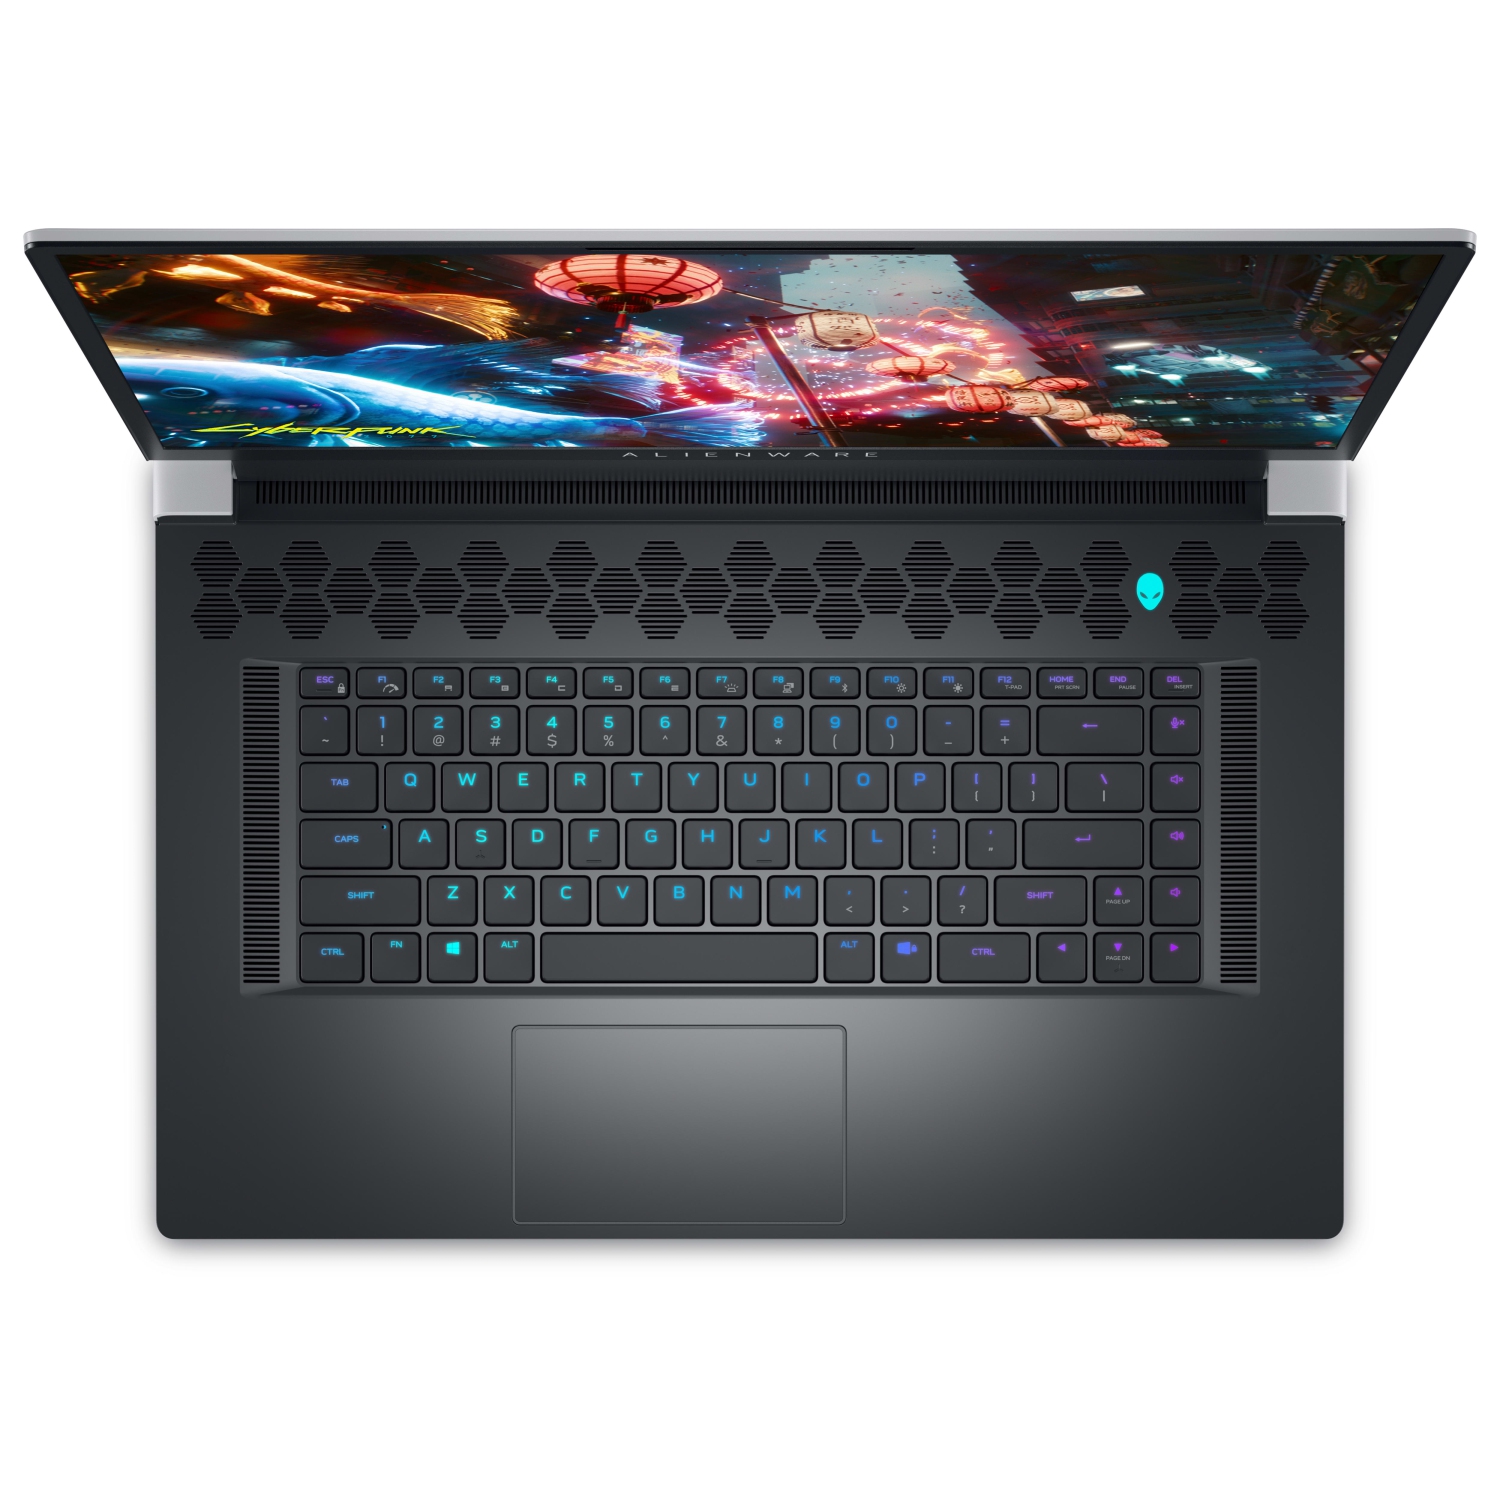 Refurbished (Excellent) – Dell Alienware X17 R2 Gaming Laptop (2022) | 17.3" QHD | Core i9 - 1TB SSD - 32GB RAM - RTX 3080 | 14 Cores @ 5 GHz - 12th Gen CPU - 8GB GDDR6X